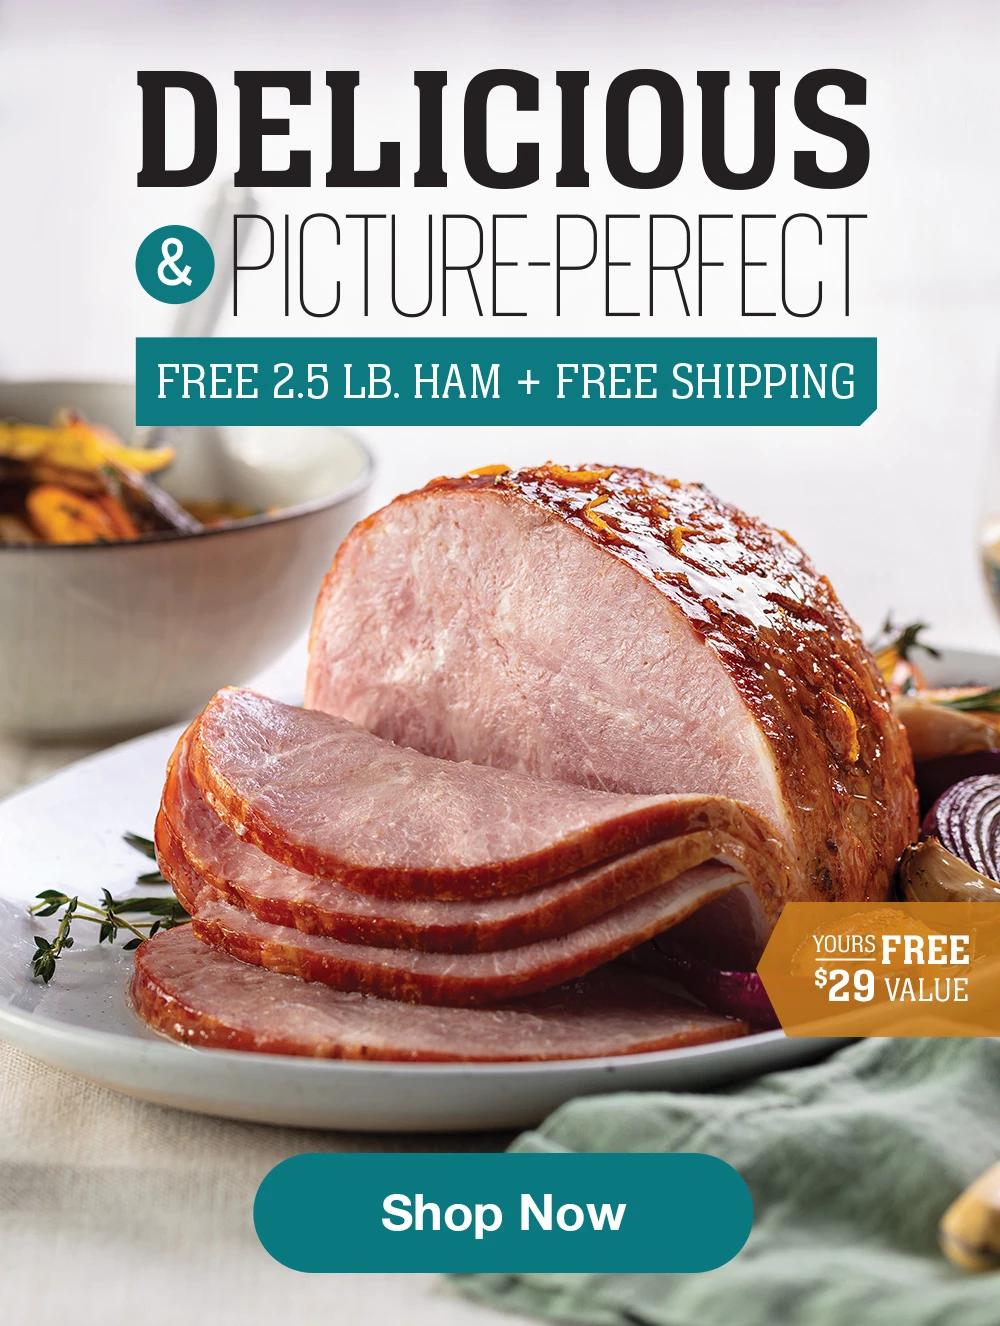 Shop today and get Free shipping | DELICIOUS & PICTURE PERFECT FREE 2.5LB. HAM + FREE SHIPPING - YOURS FREE | $29 VALUE || SHOP NOW